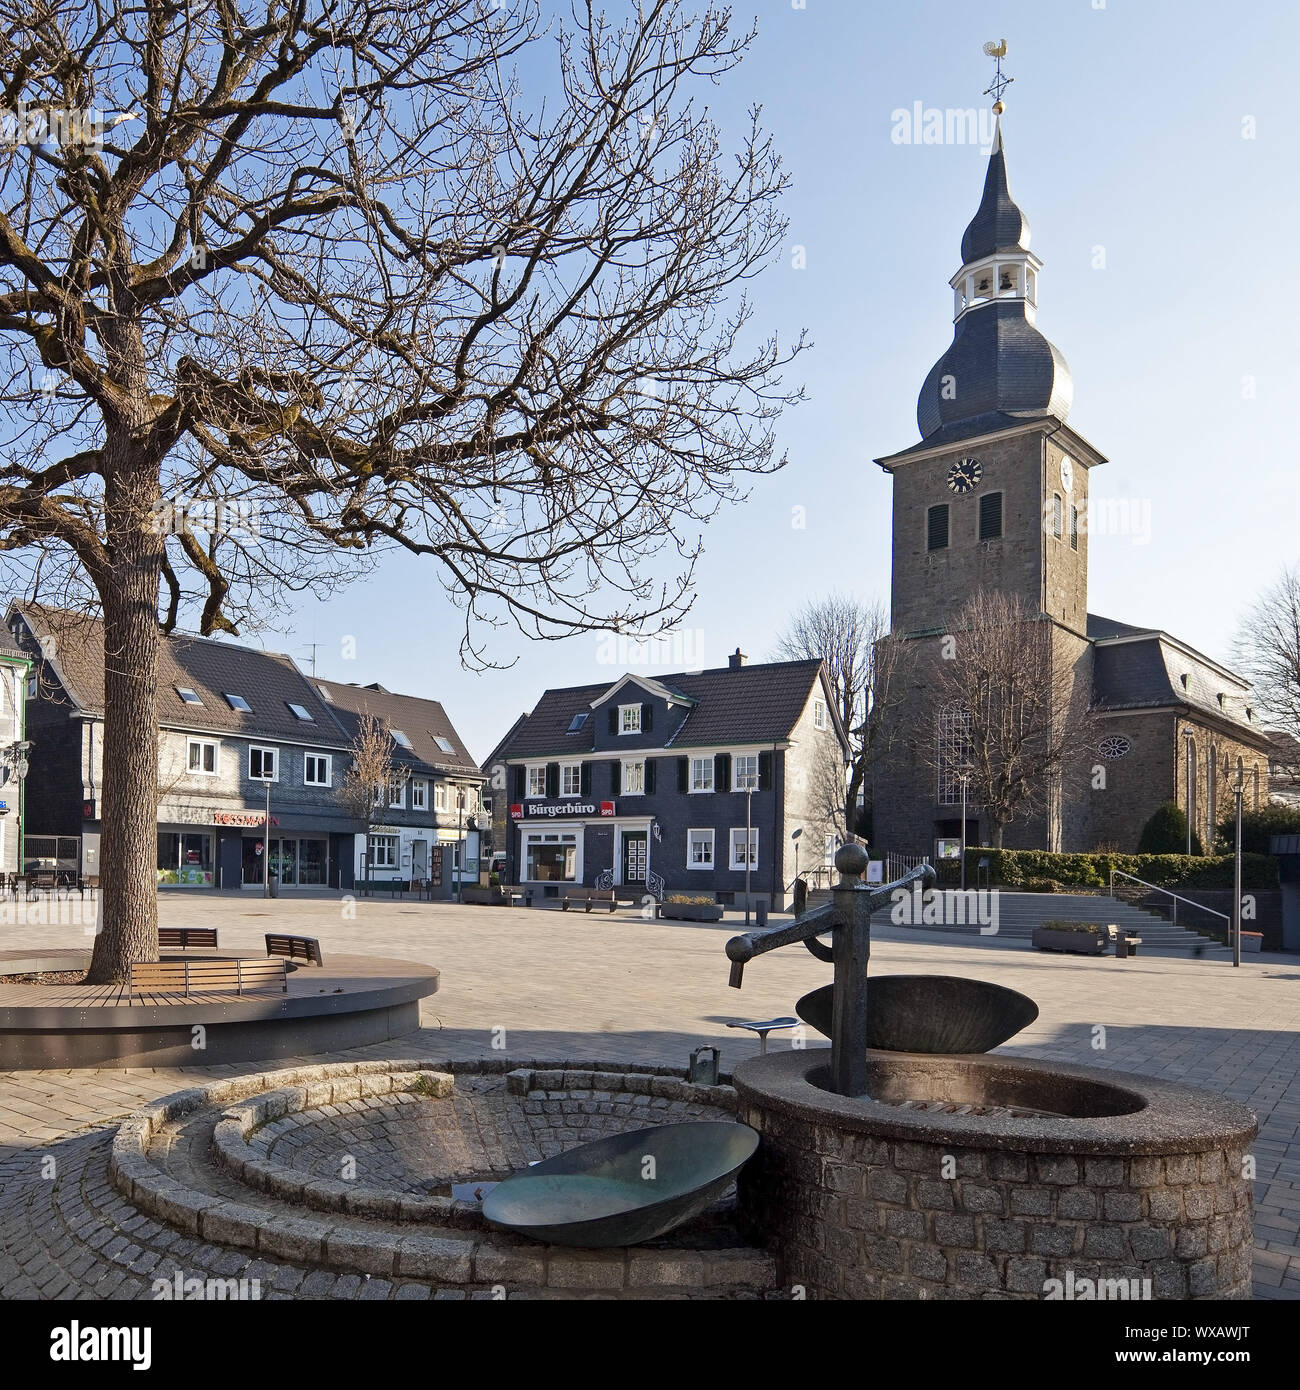 cityscape with fountain, market square and church in spring, Radevormwald, Germany, Europe Stock Photo